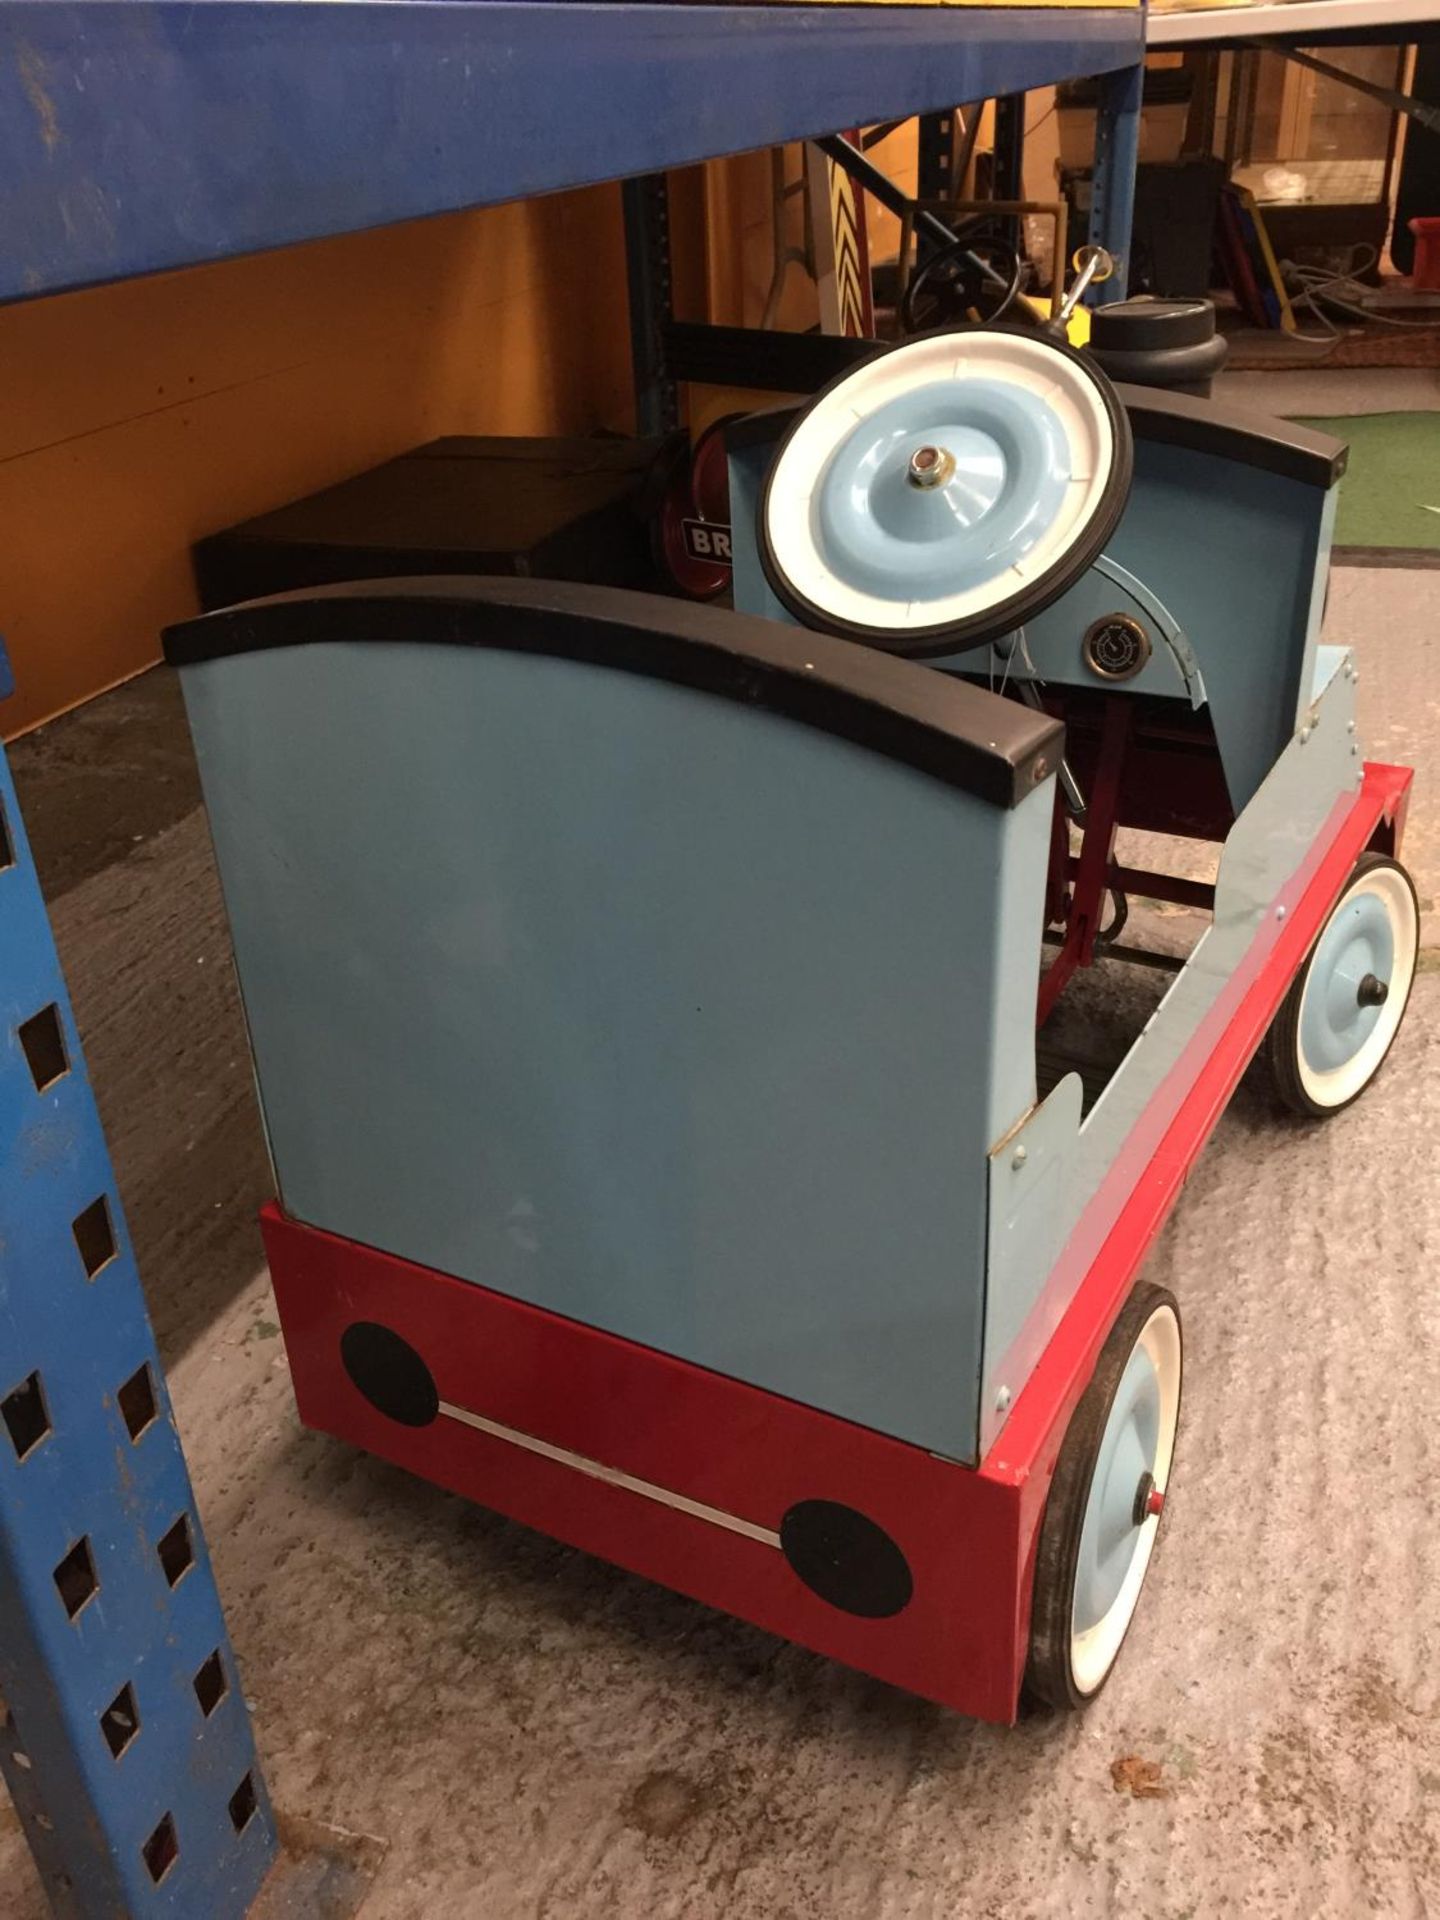 A THOMAS THE TANK ENGINE STYLE METAL PEDAL TRAIN - Image 3 of 5